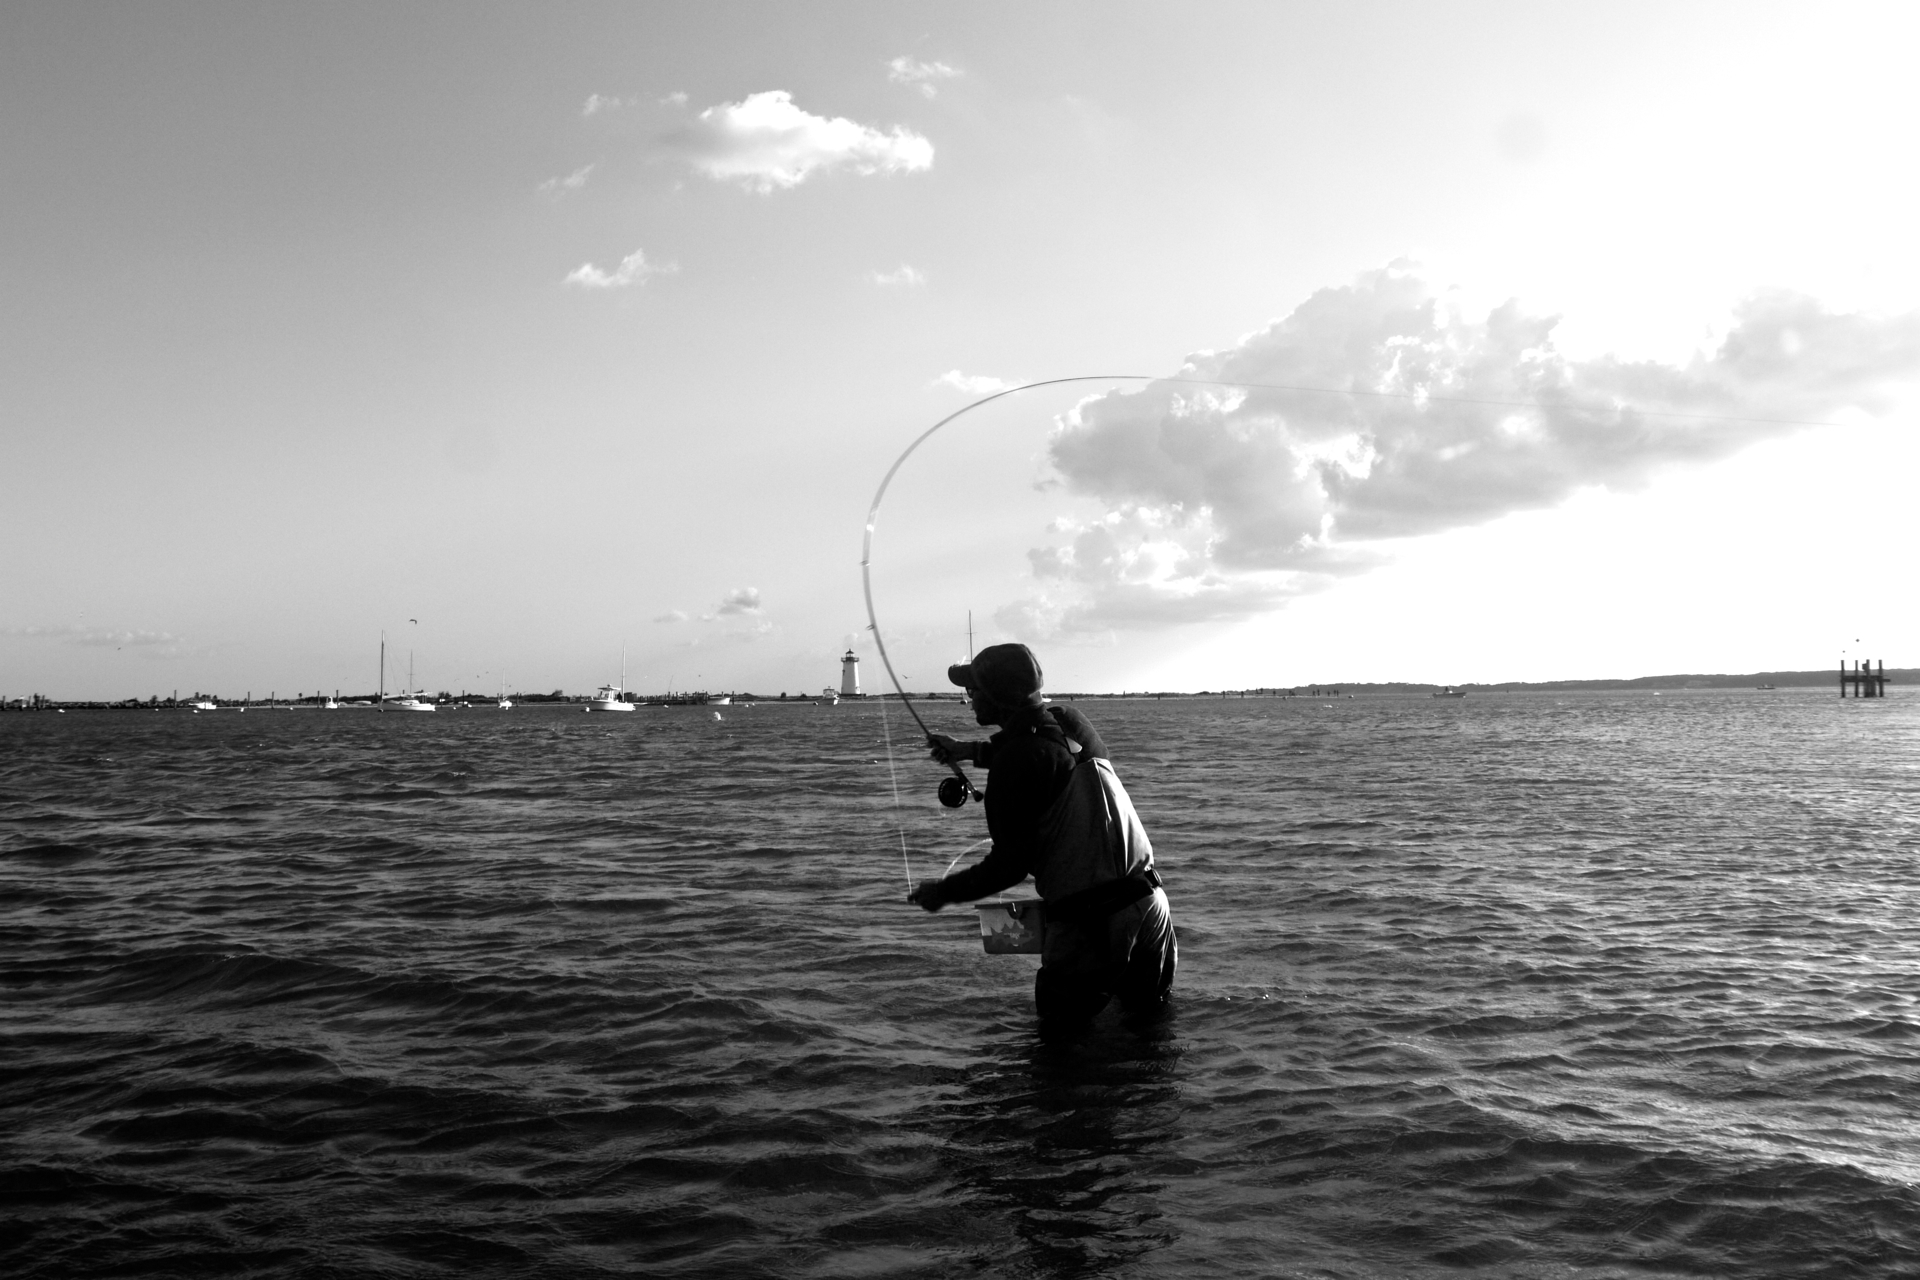 a man with a hat and long fish rod wades in a body of water